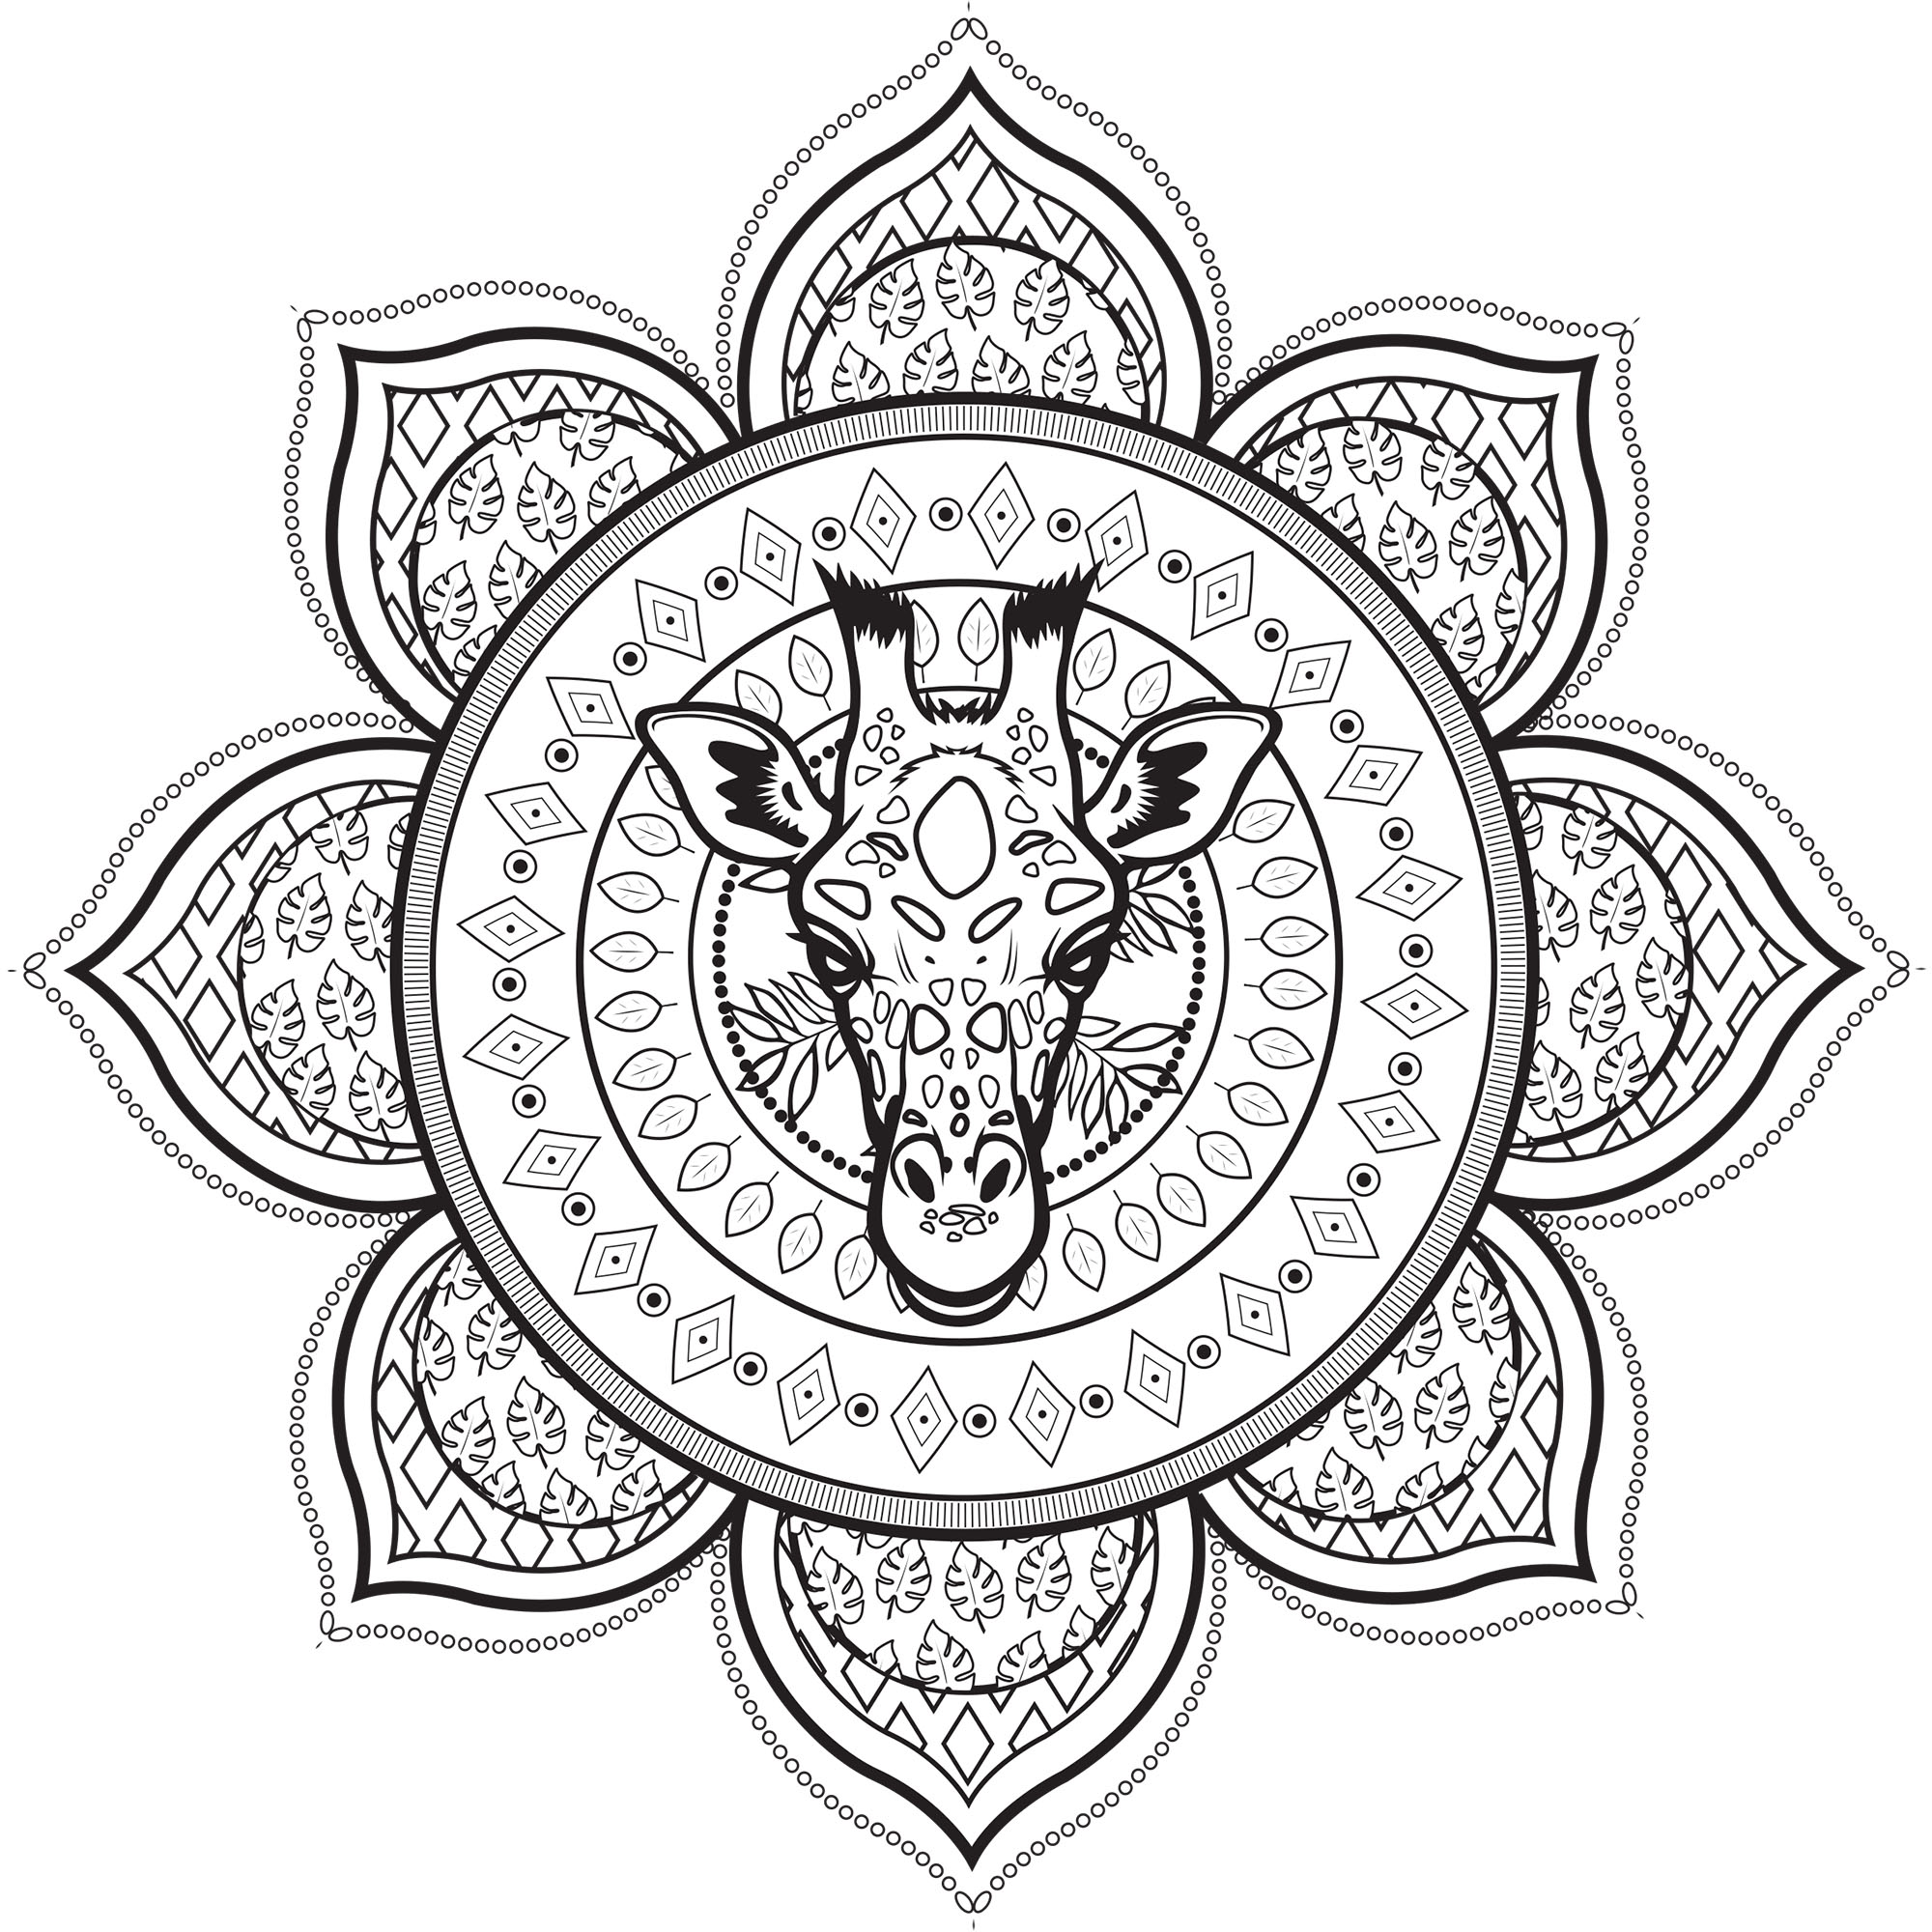 A beautiful Mandala coloring page with a giraffe head, of great quality and originality. It's up to you to choose the most appropriate colors. Color also all the patterns and leaves of this design !